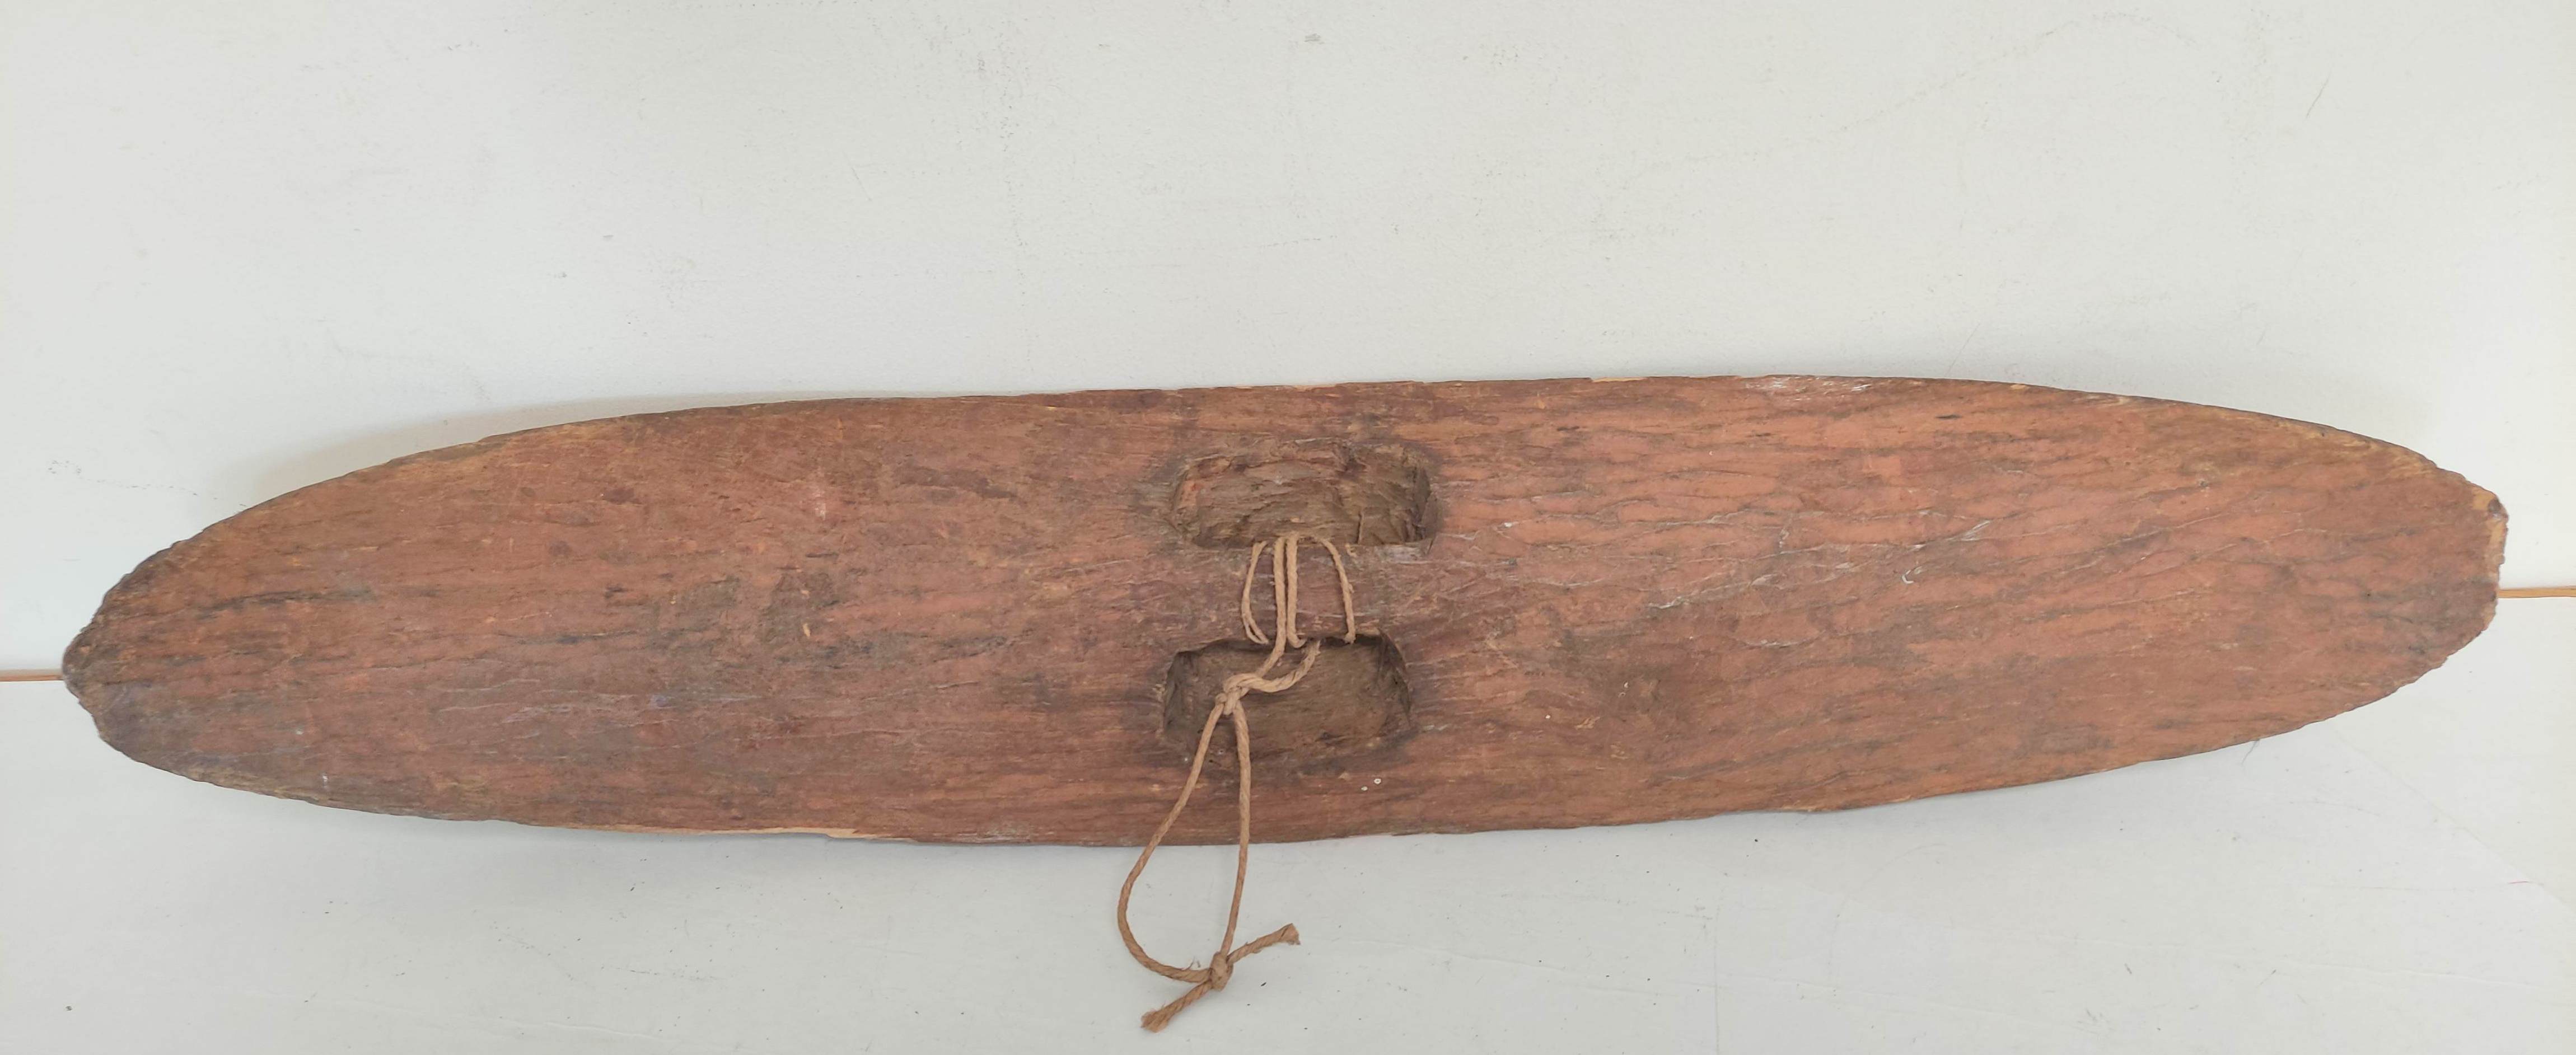 Antique Australian aboriginal wooden Churinga shield of elongated ovoid form and decorated profusely - Image 4 of 5